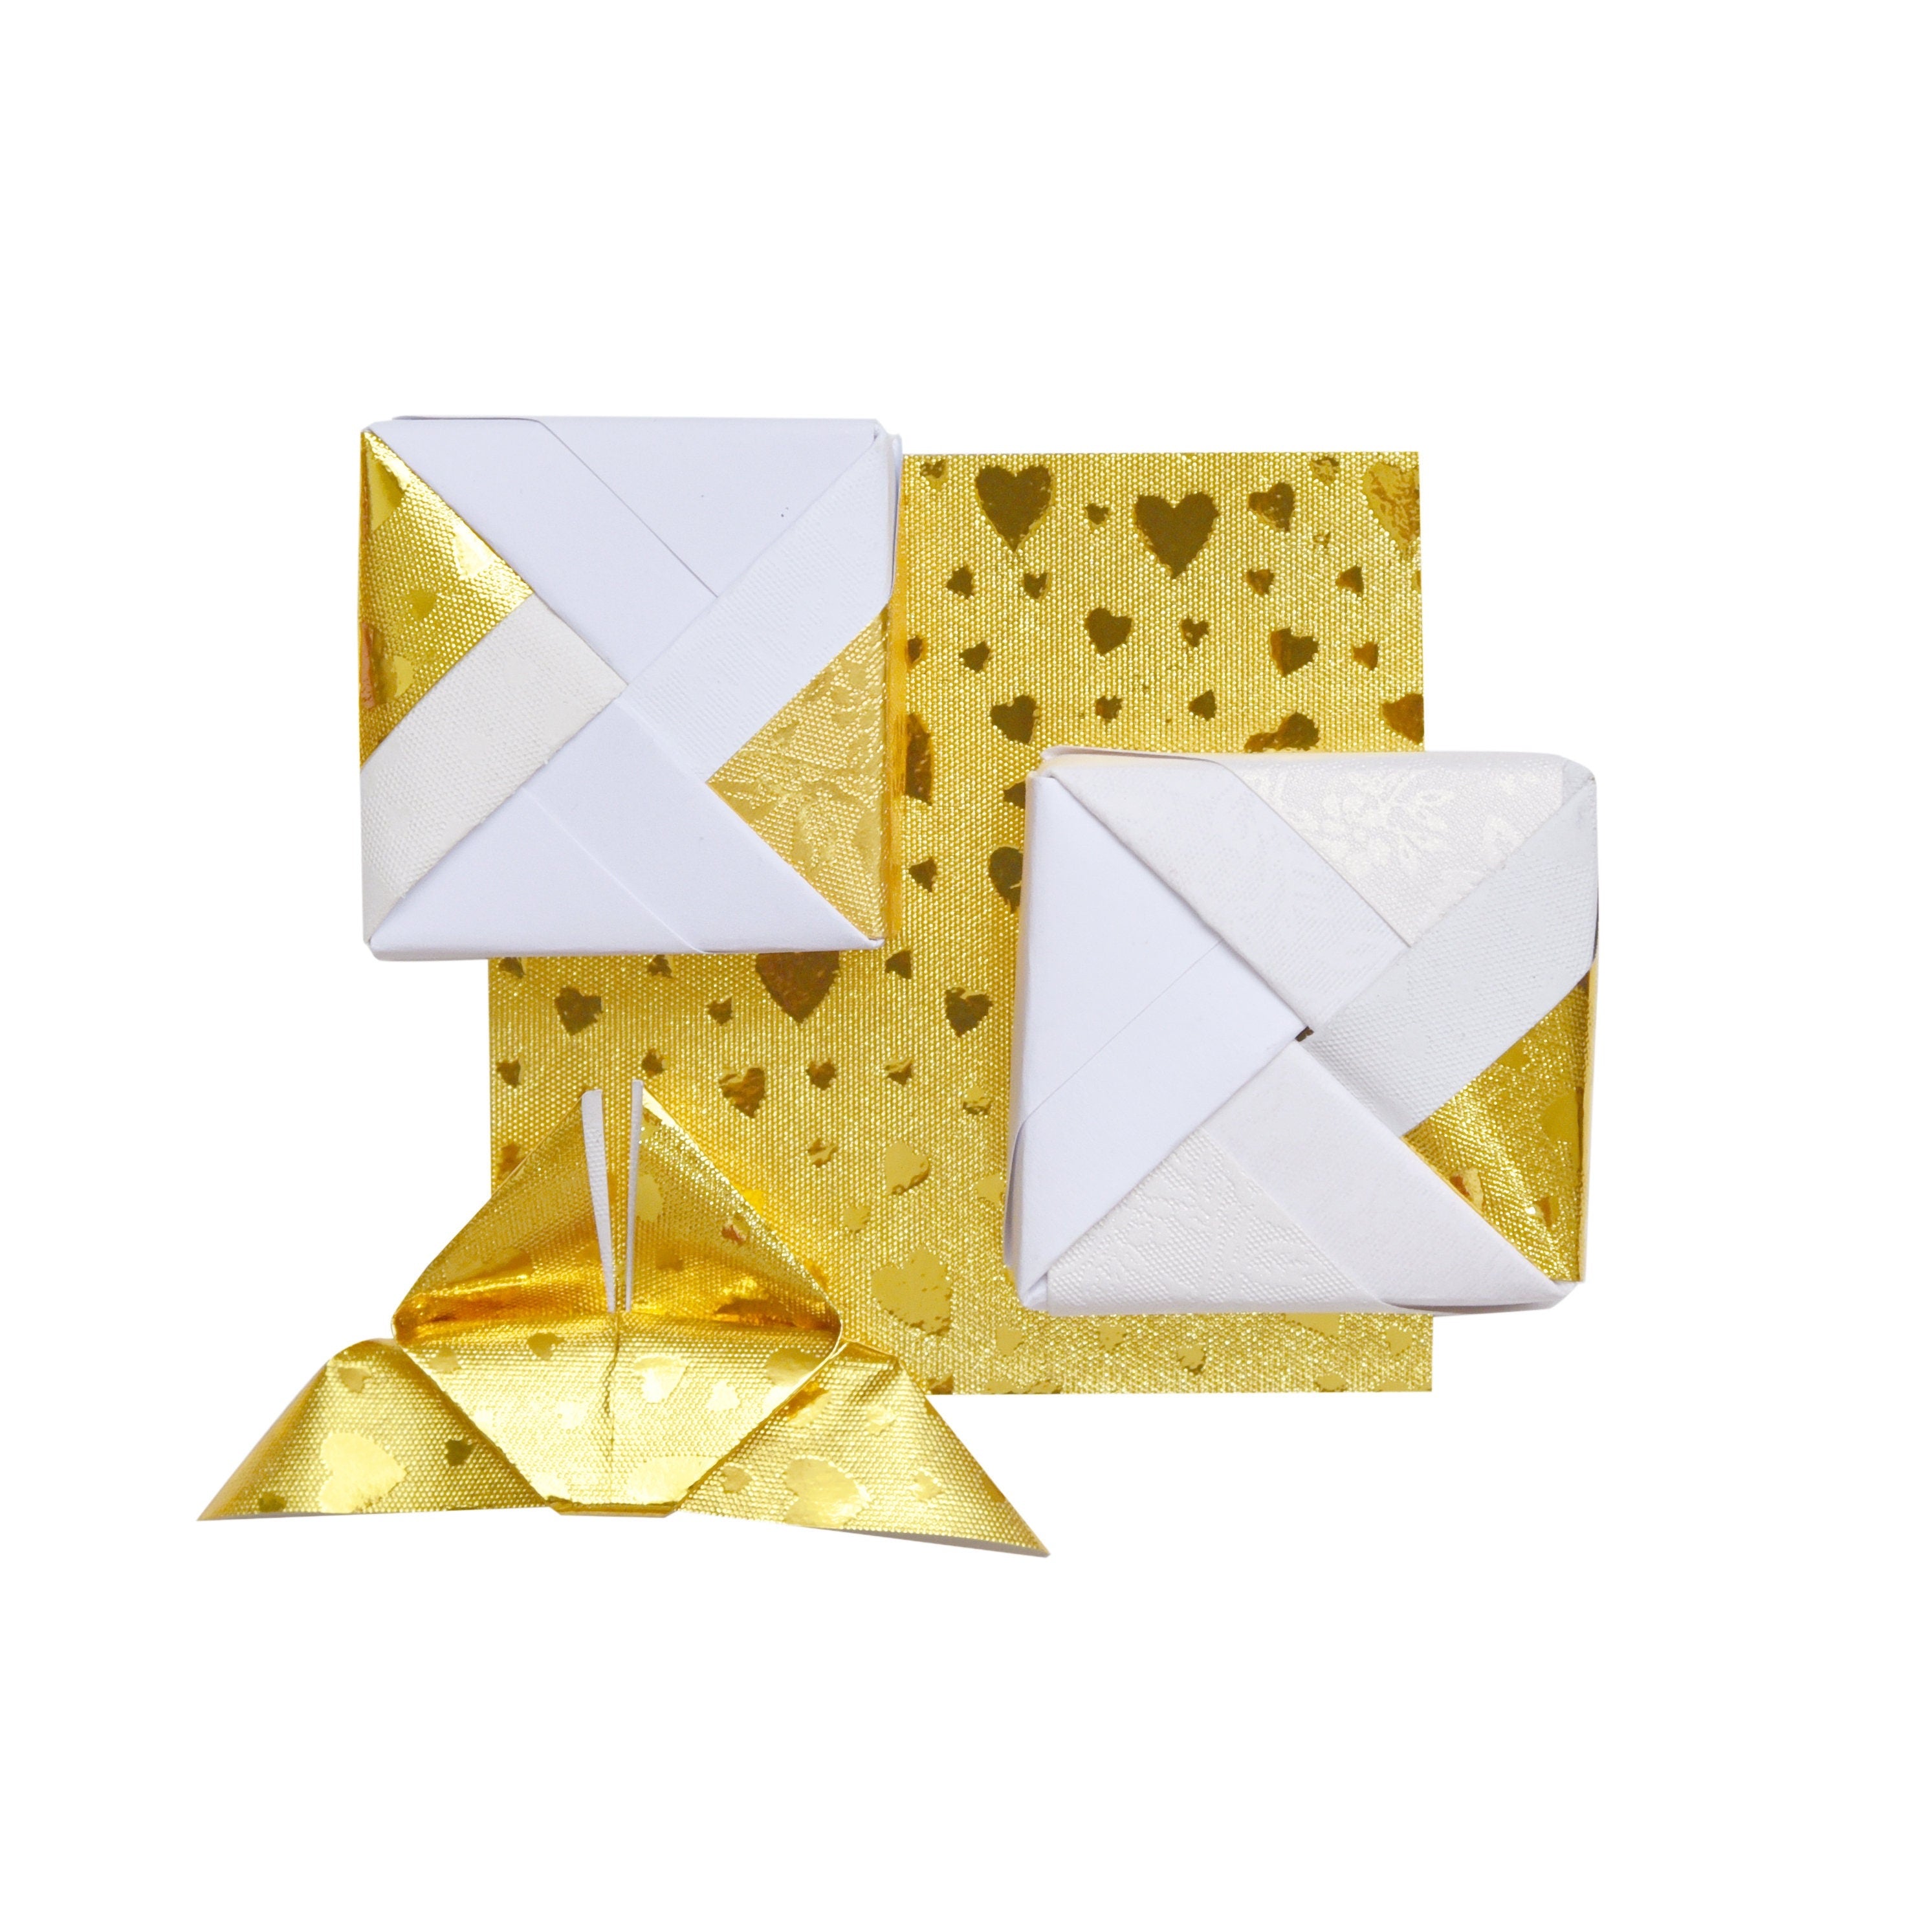 100 Gold Heart Origami Paper Sheets 3x3 inches for Folding Paper, Origami Cranes, Origami Decoration